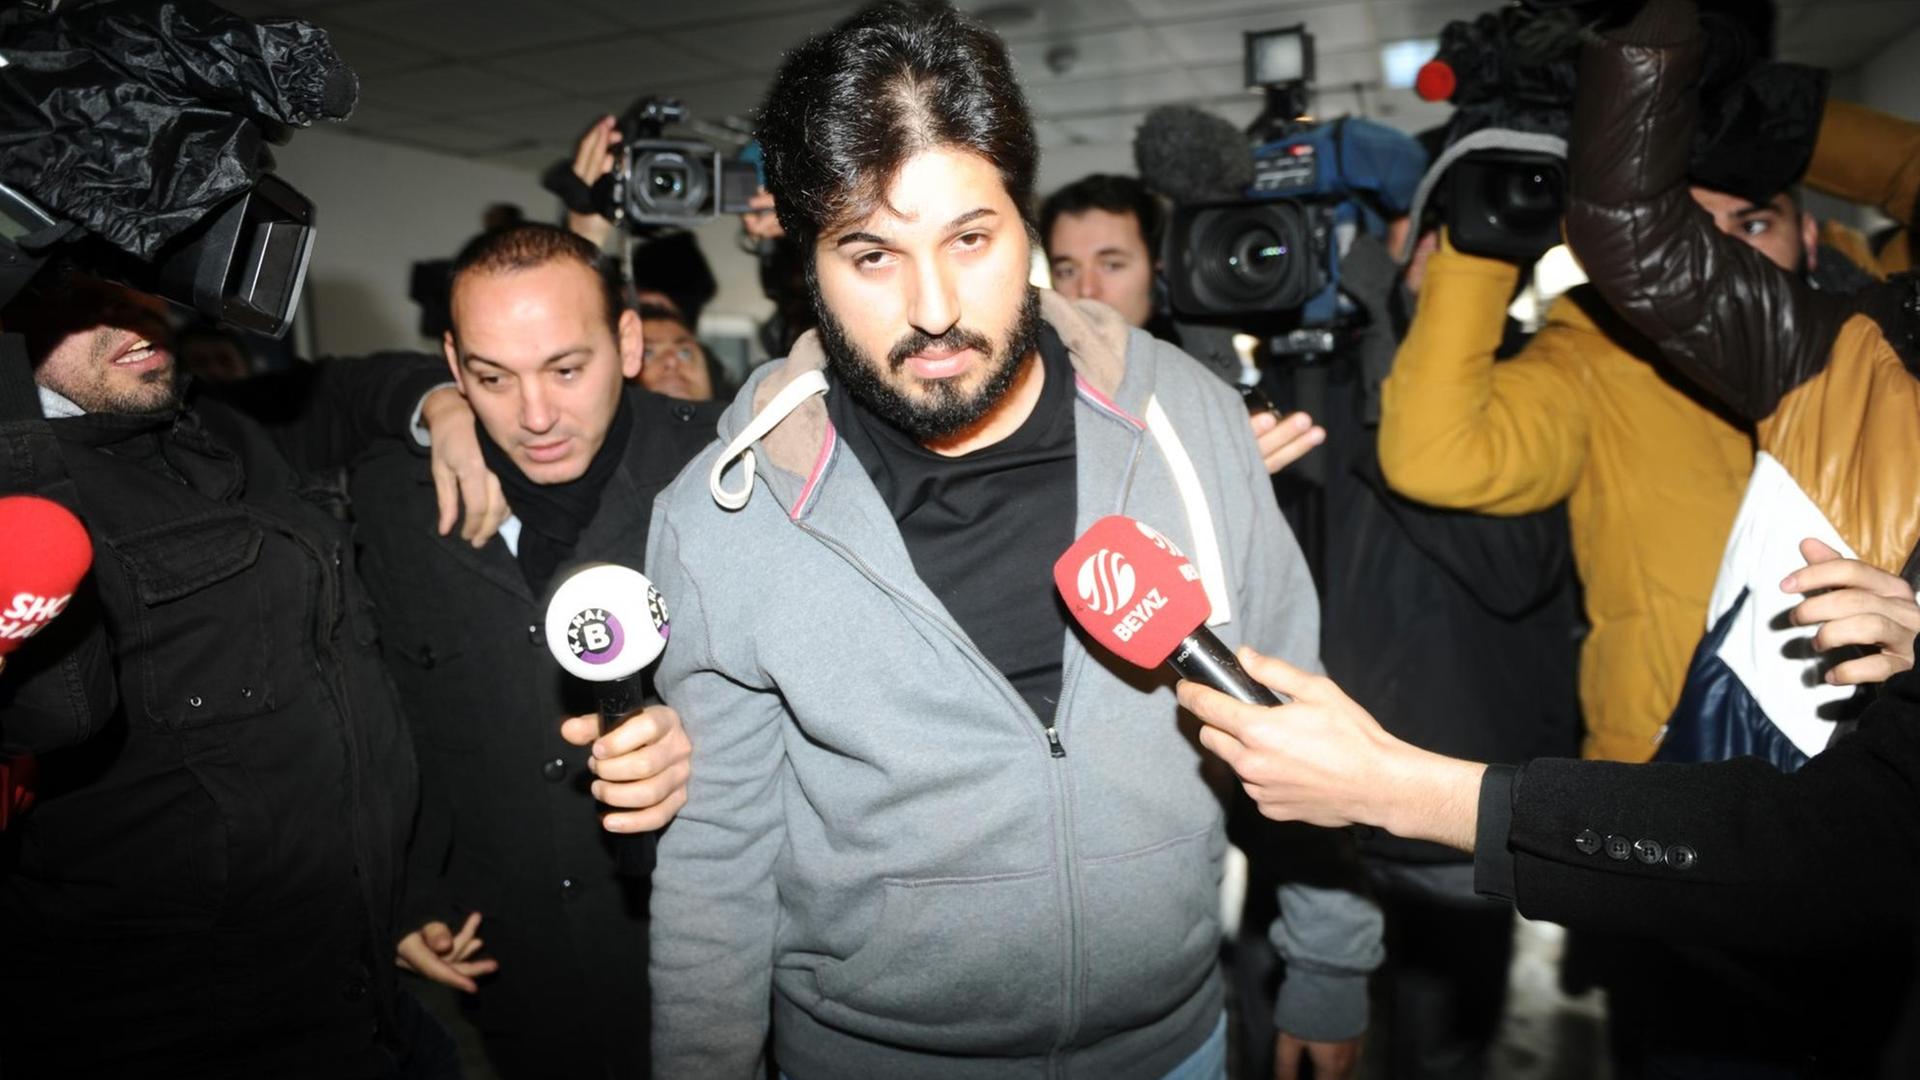 Detained Azerbaijani businessman Reza Zarrab (C) is surrounded by journalists as he arrives at a police center in Istanbul on December 17 ,2013. Turkish police detained more than 20 people including the sons of three cabinet ministers and several high-profile businessmen on December 17 in a probe into alleged bribery and corruption, local media reported. Prime Minister Recep Tayyip Erdogan's ruling Justice and Development Party (AKP), which boasts of being pro-business, has pledged to root out corruption, a chronic problem in Turkey.